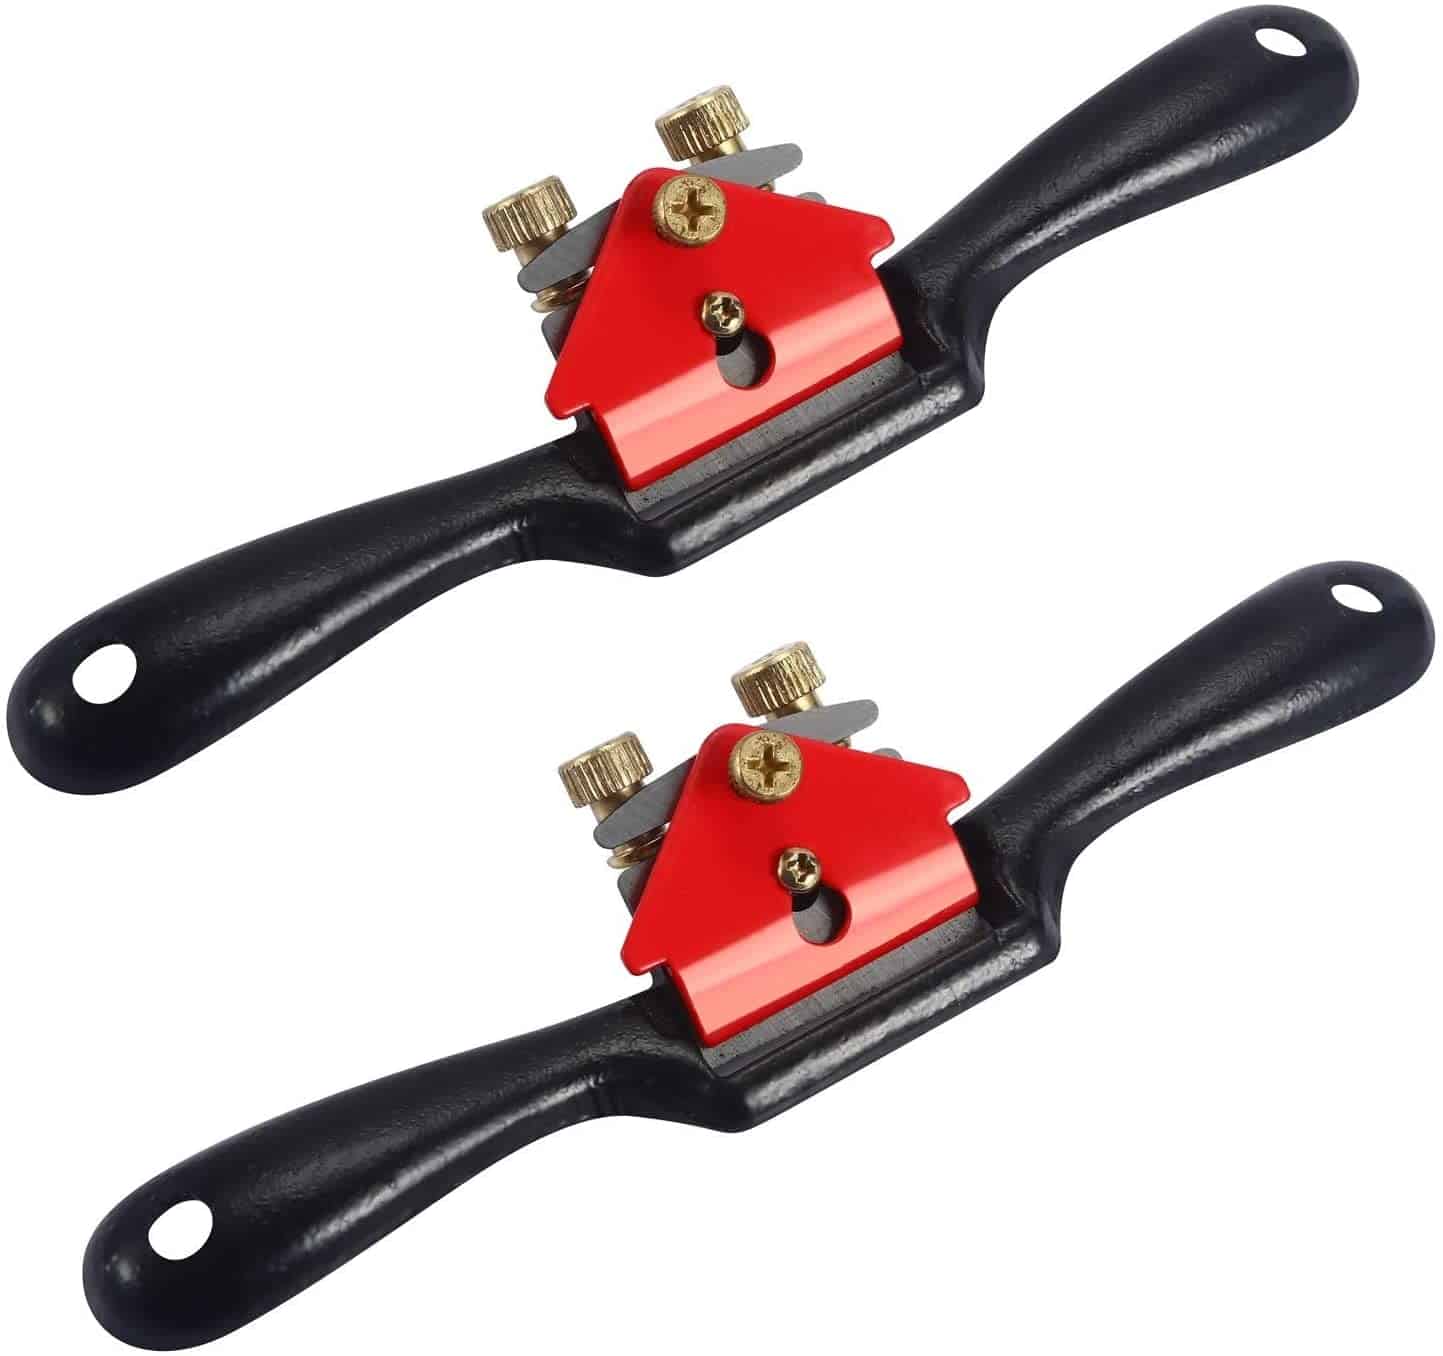 Best overall spokeshave- Anndason 2 Piece Adjustable Spokeshave with flat base